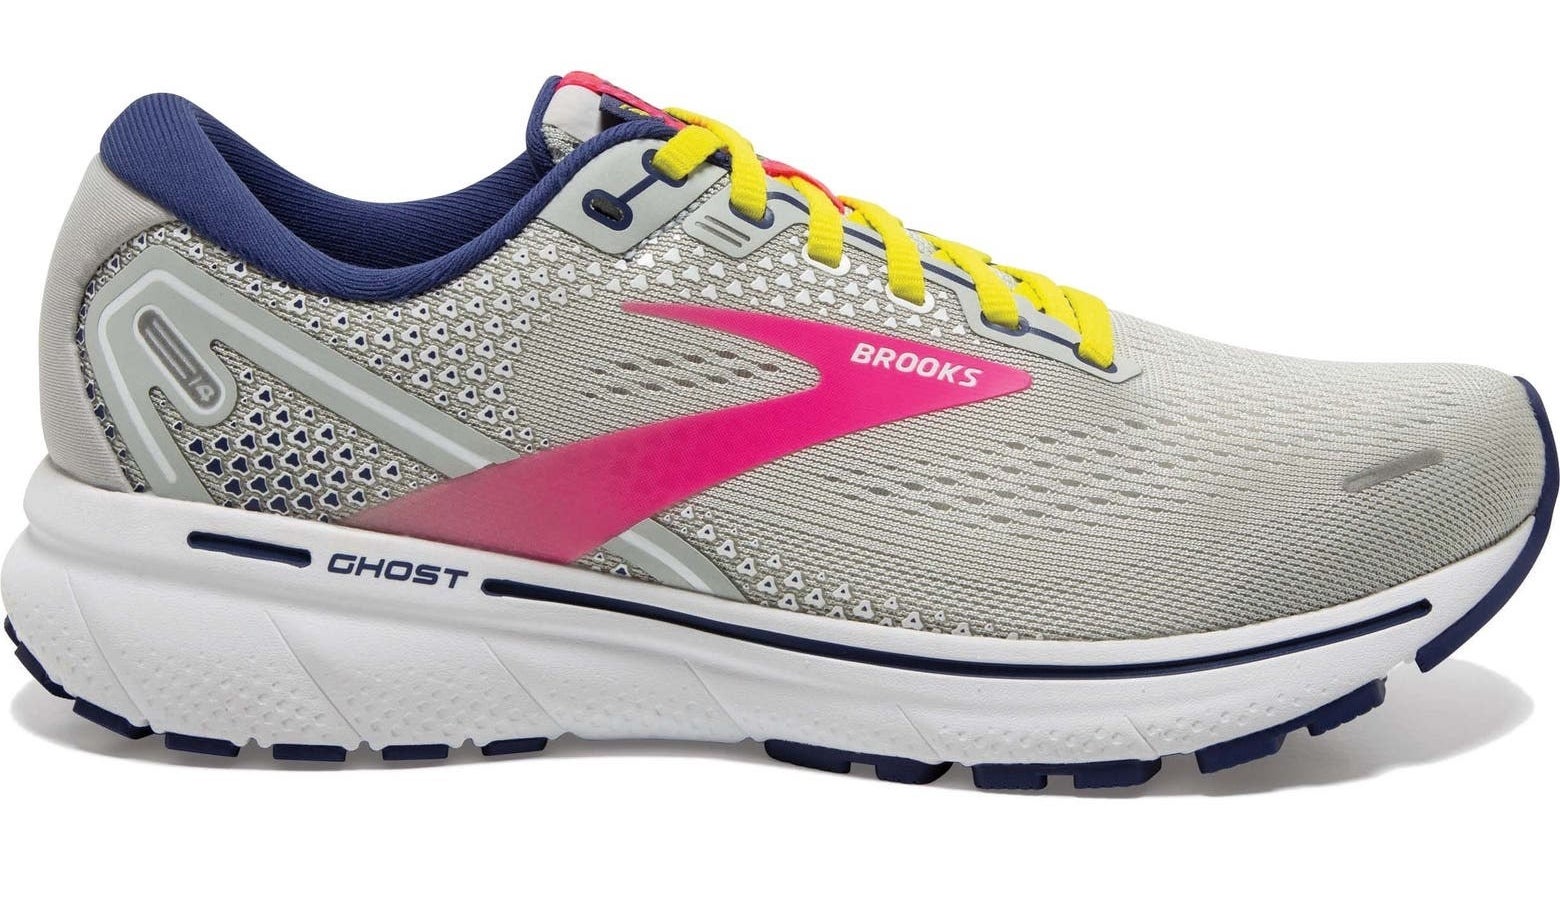 Side view of the sneaker in grey with pink, yellow and blue accents